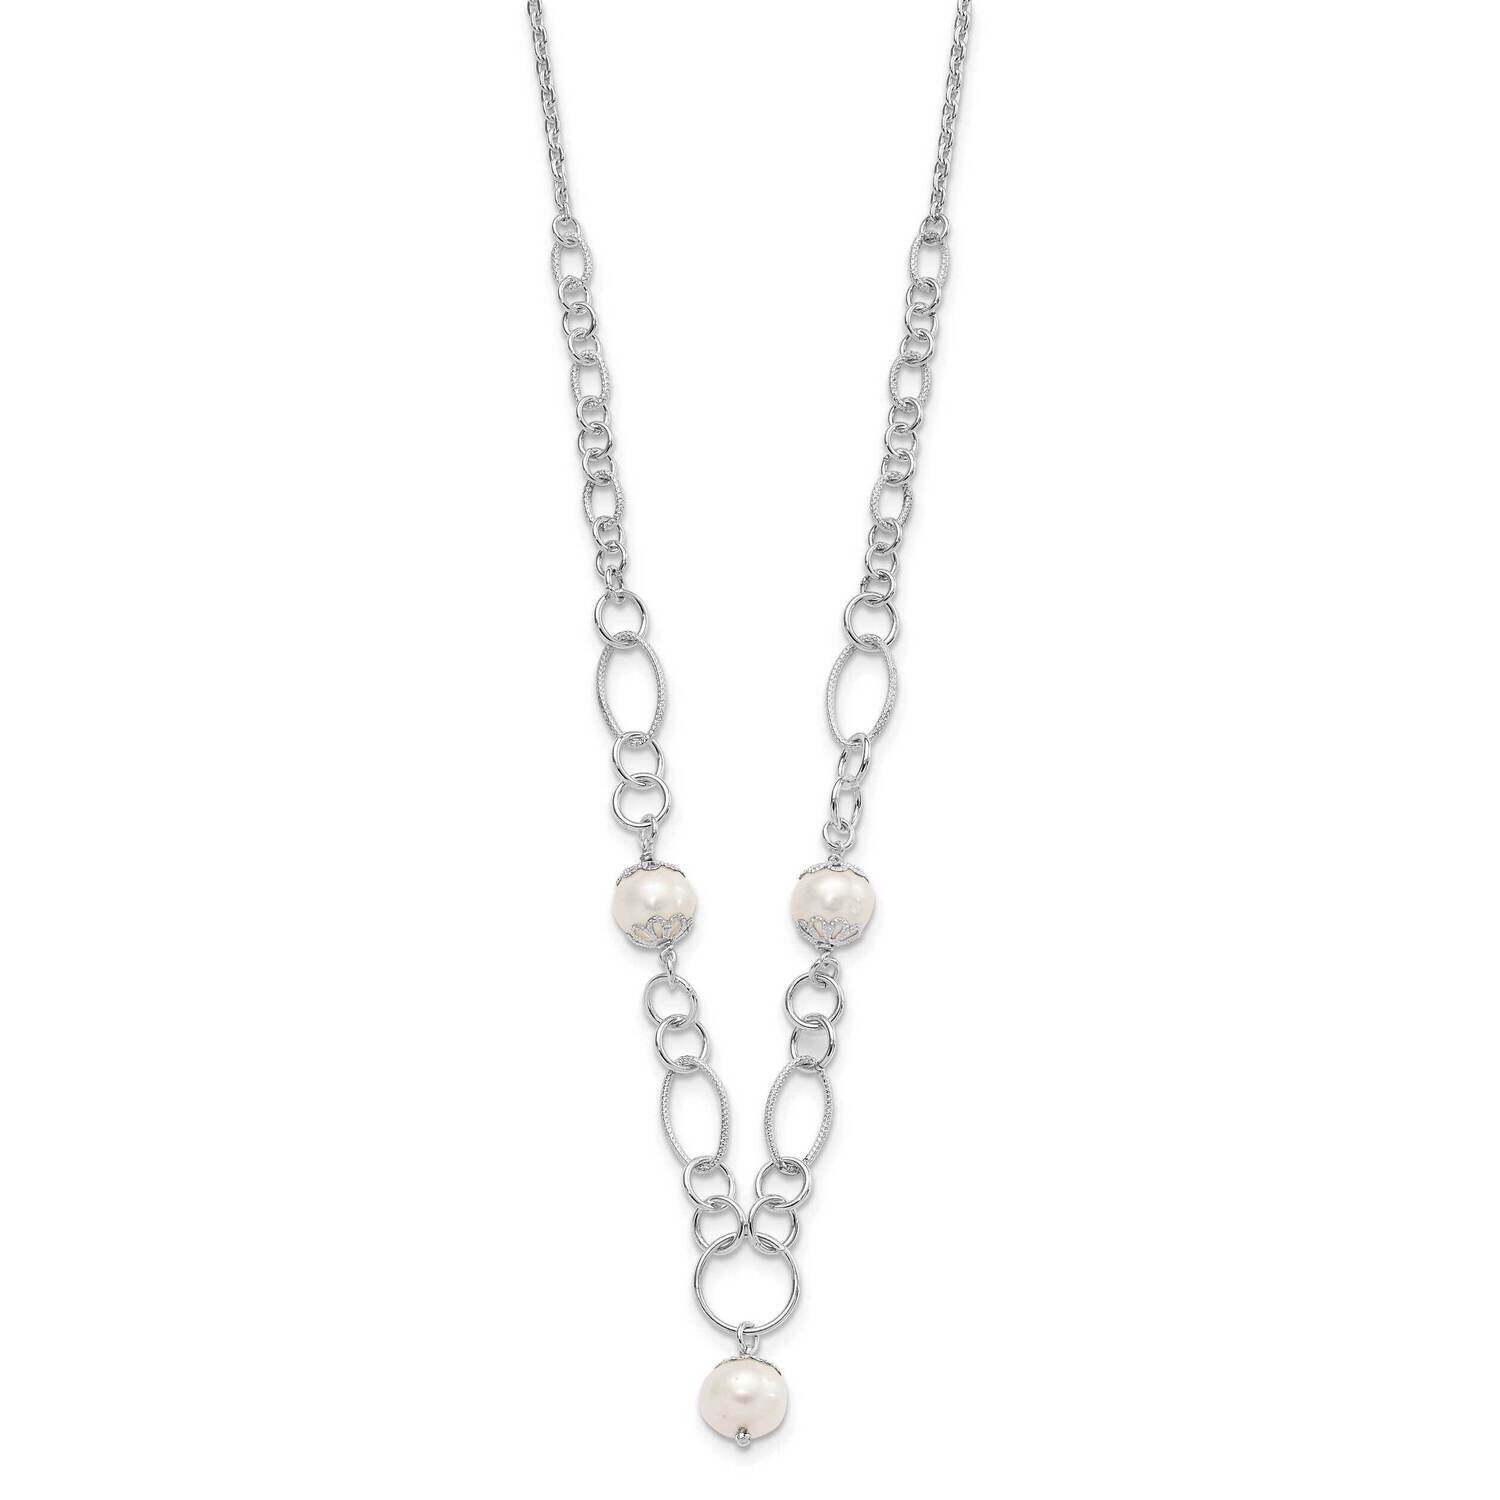 Fancy Simulated Pearl Drop Necklace Sterling Silver Polished QG2863-18